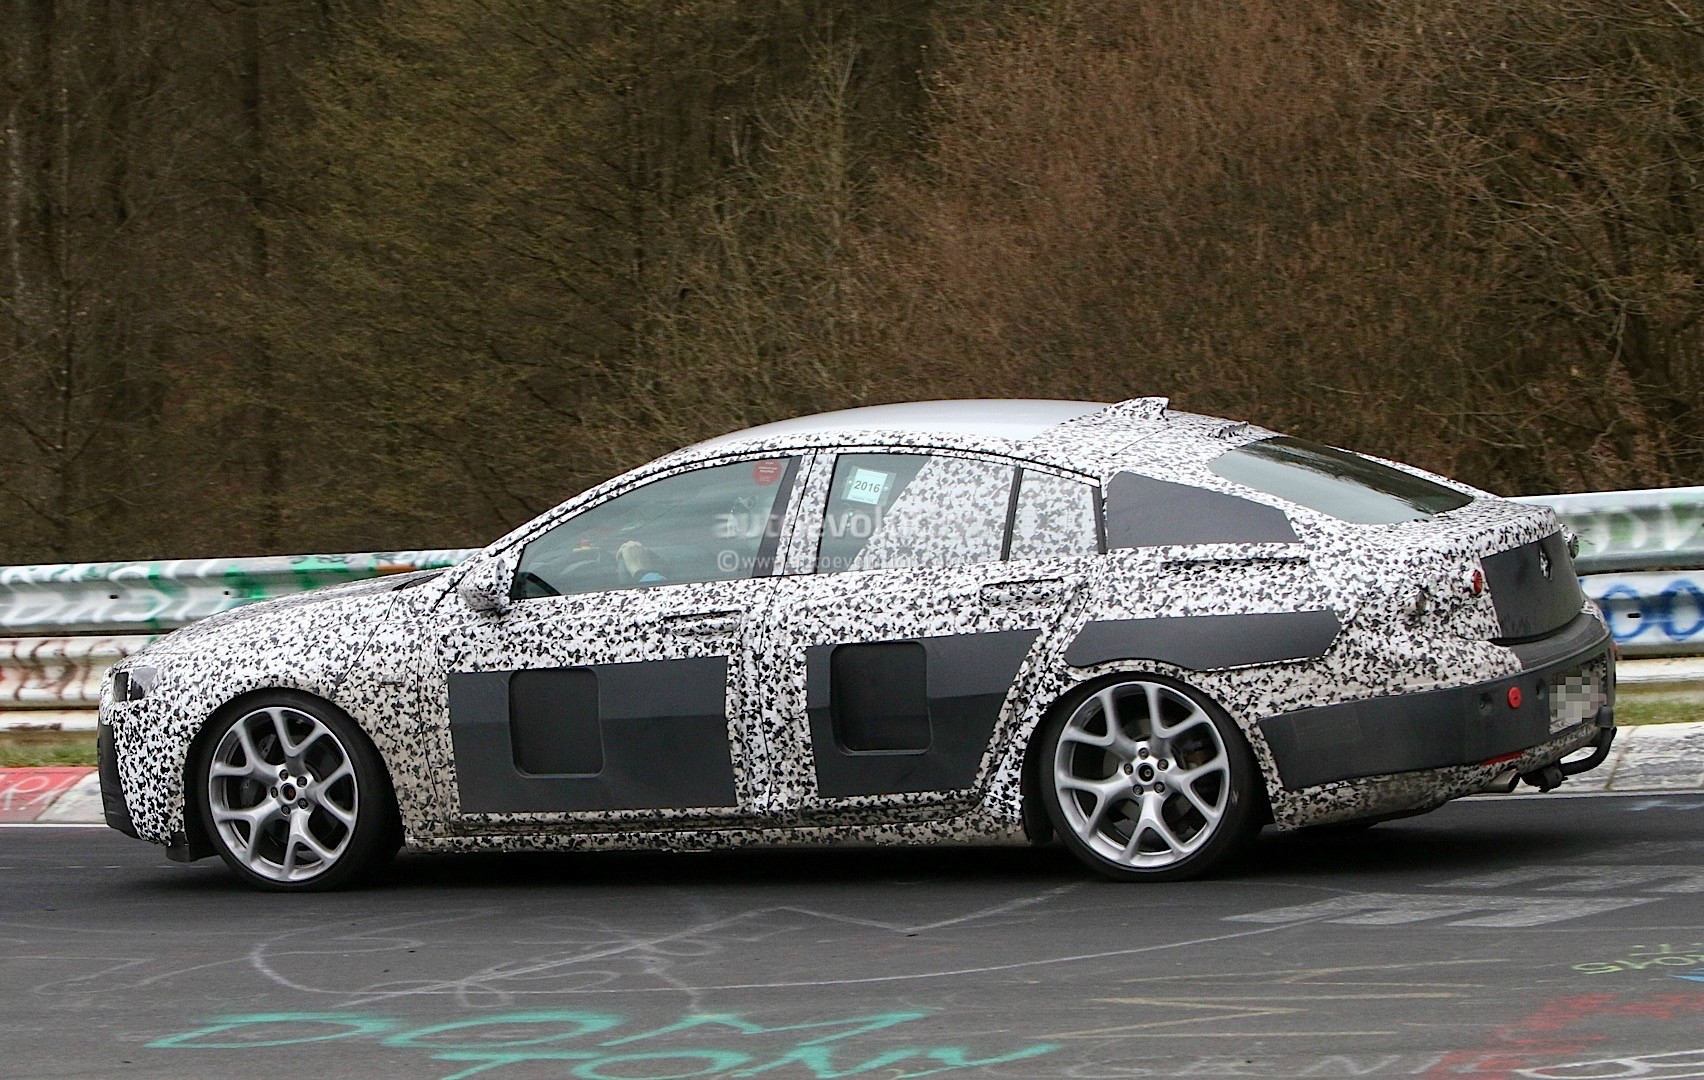 2017 Opel Insignia Stretches Its Legs On the Nurburgring Nordschleife ...